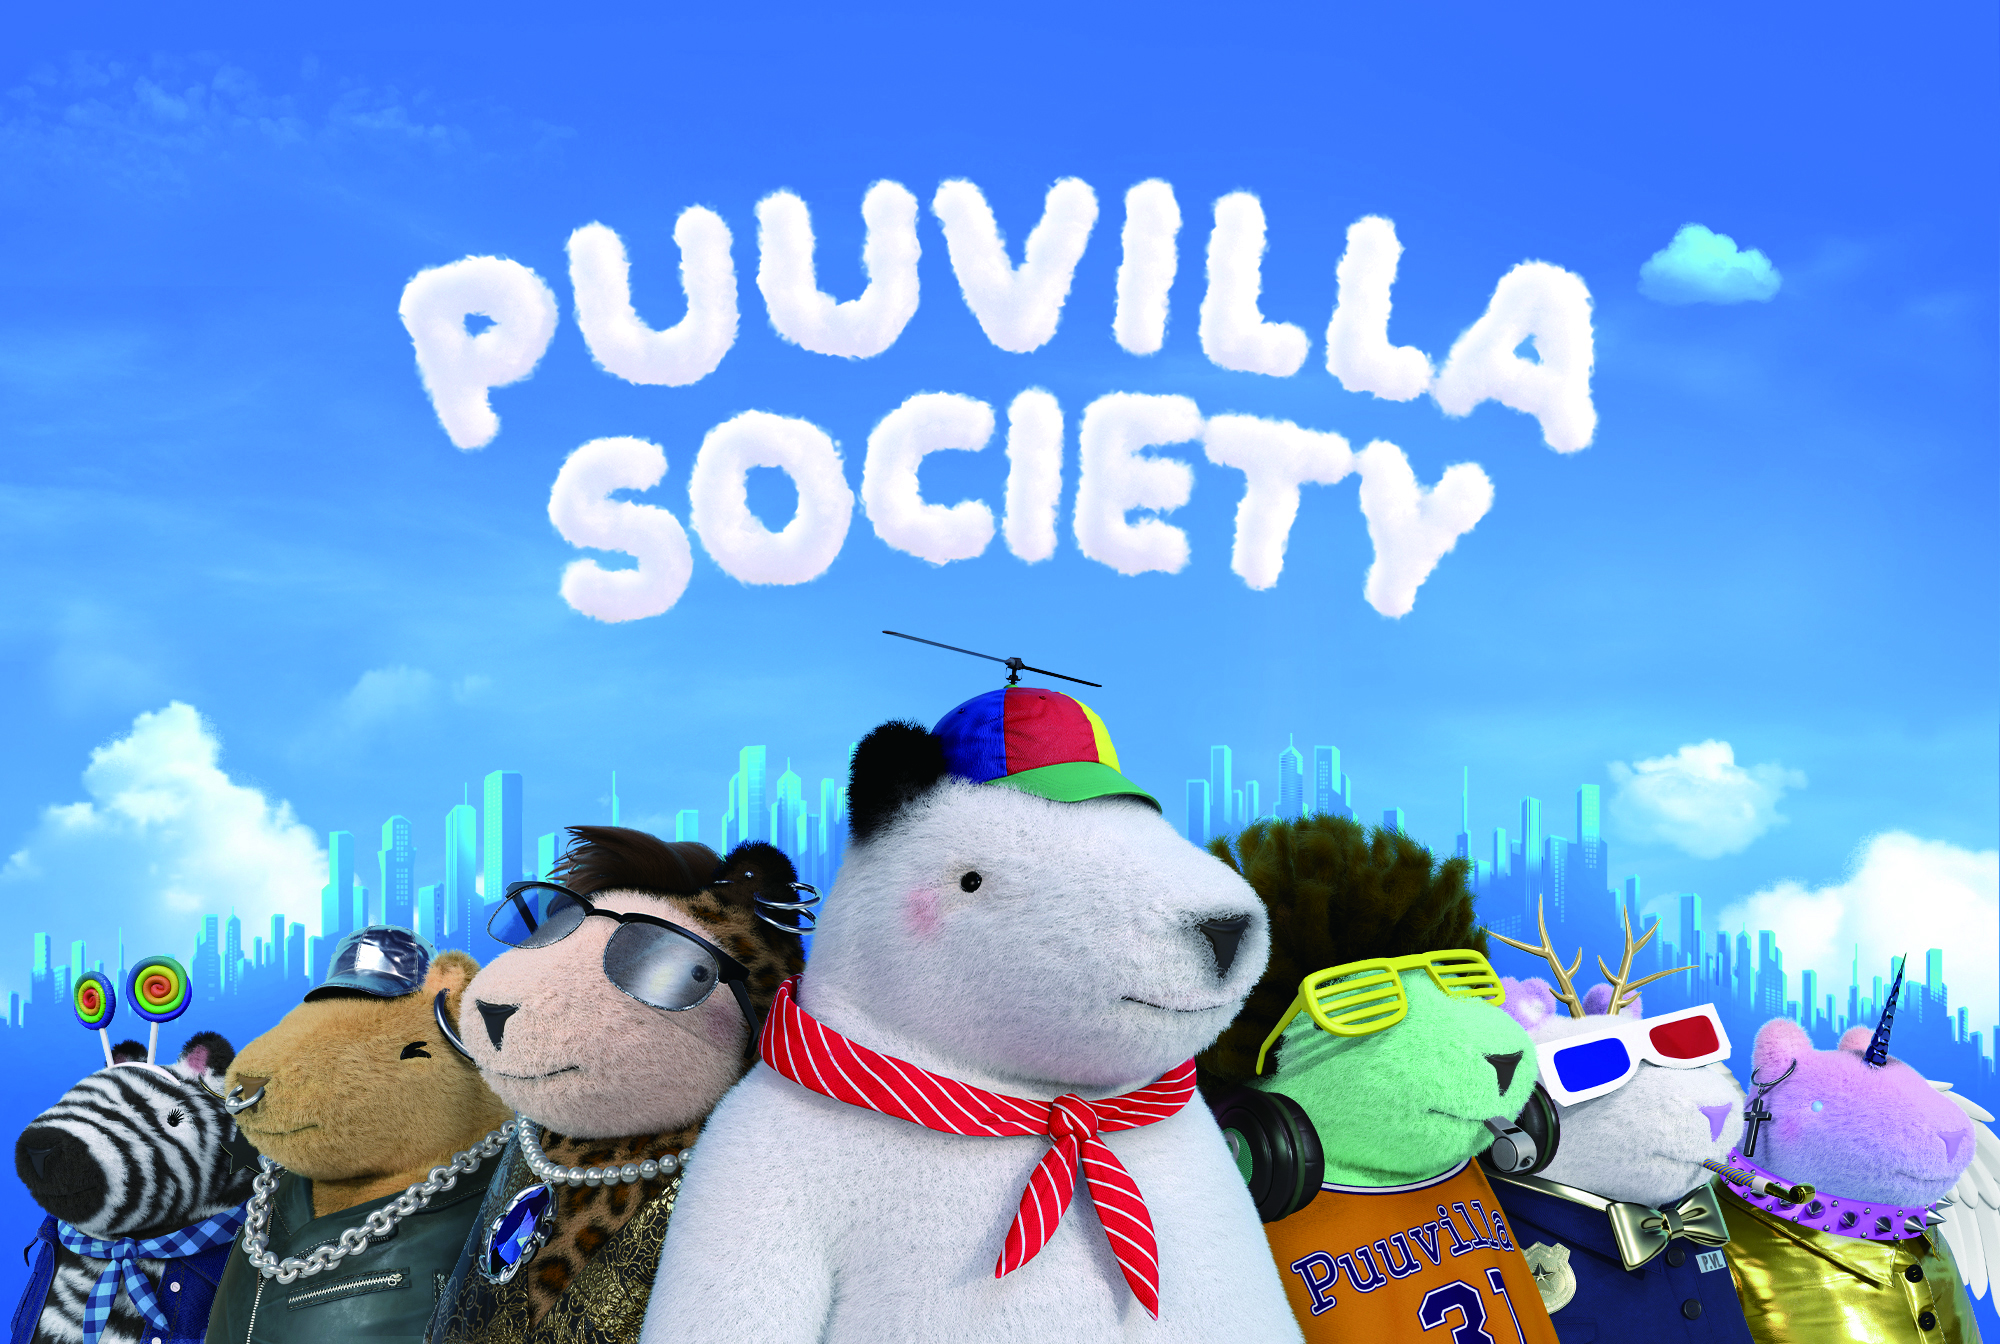 Puuvilla Society: NFTs as a new service tool